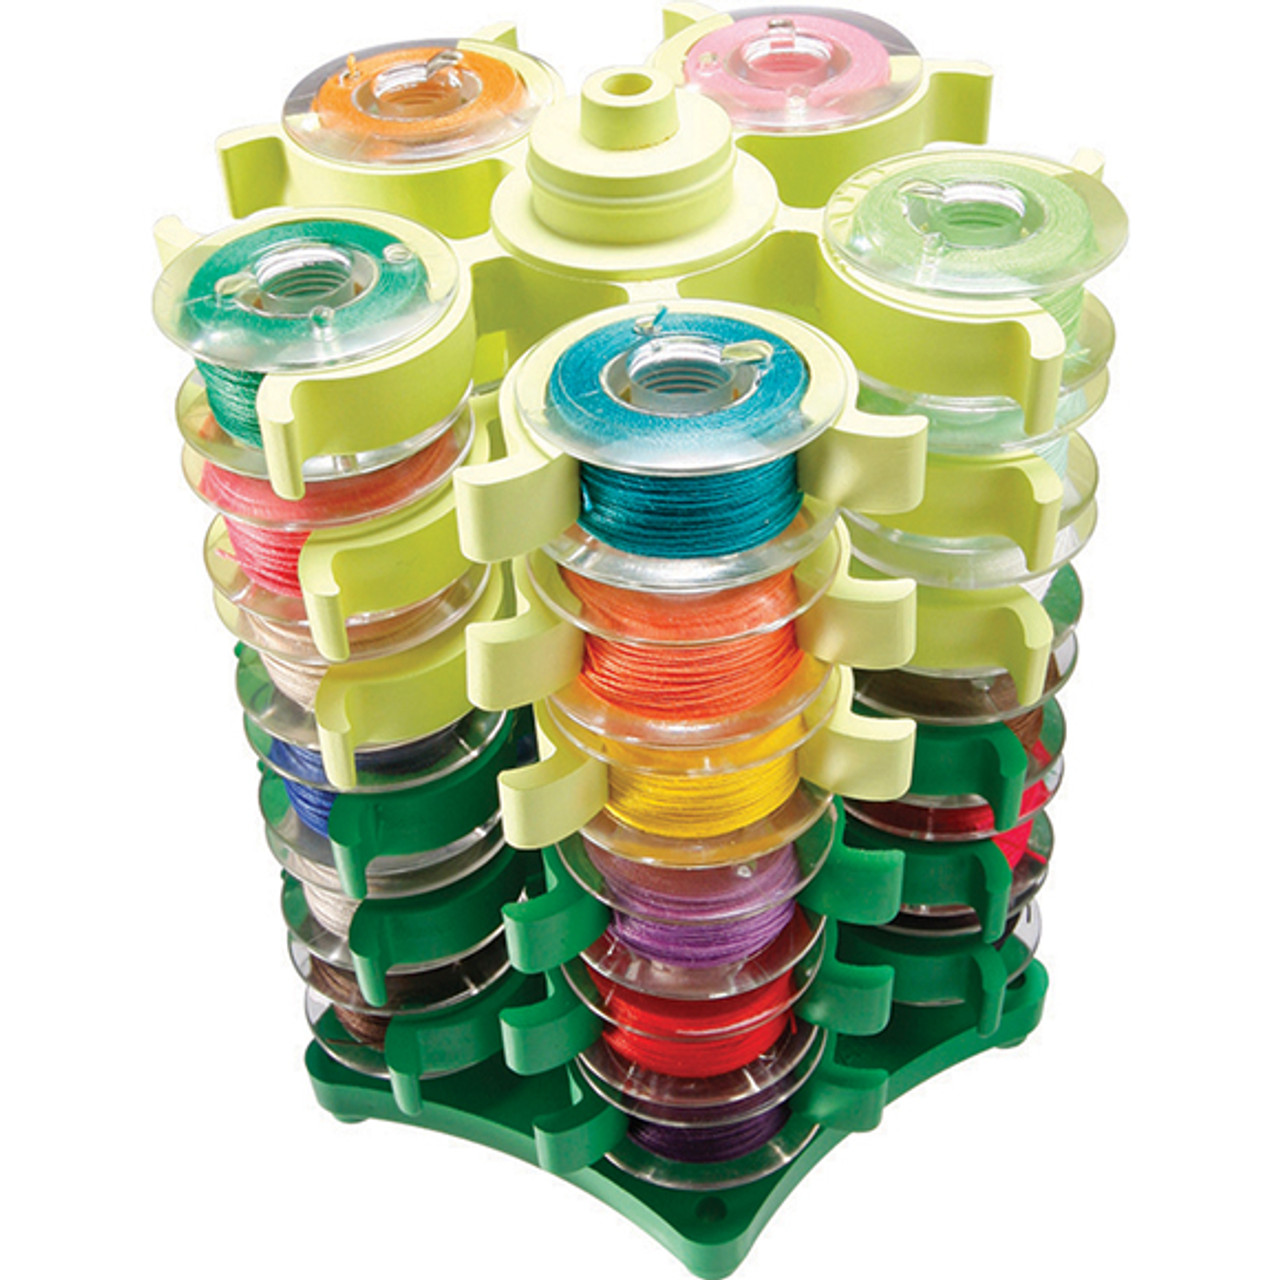 Stack ‘n Store Bobbin Tower in use